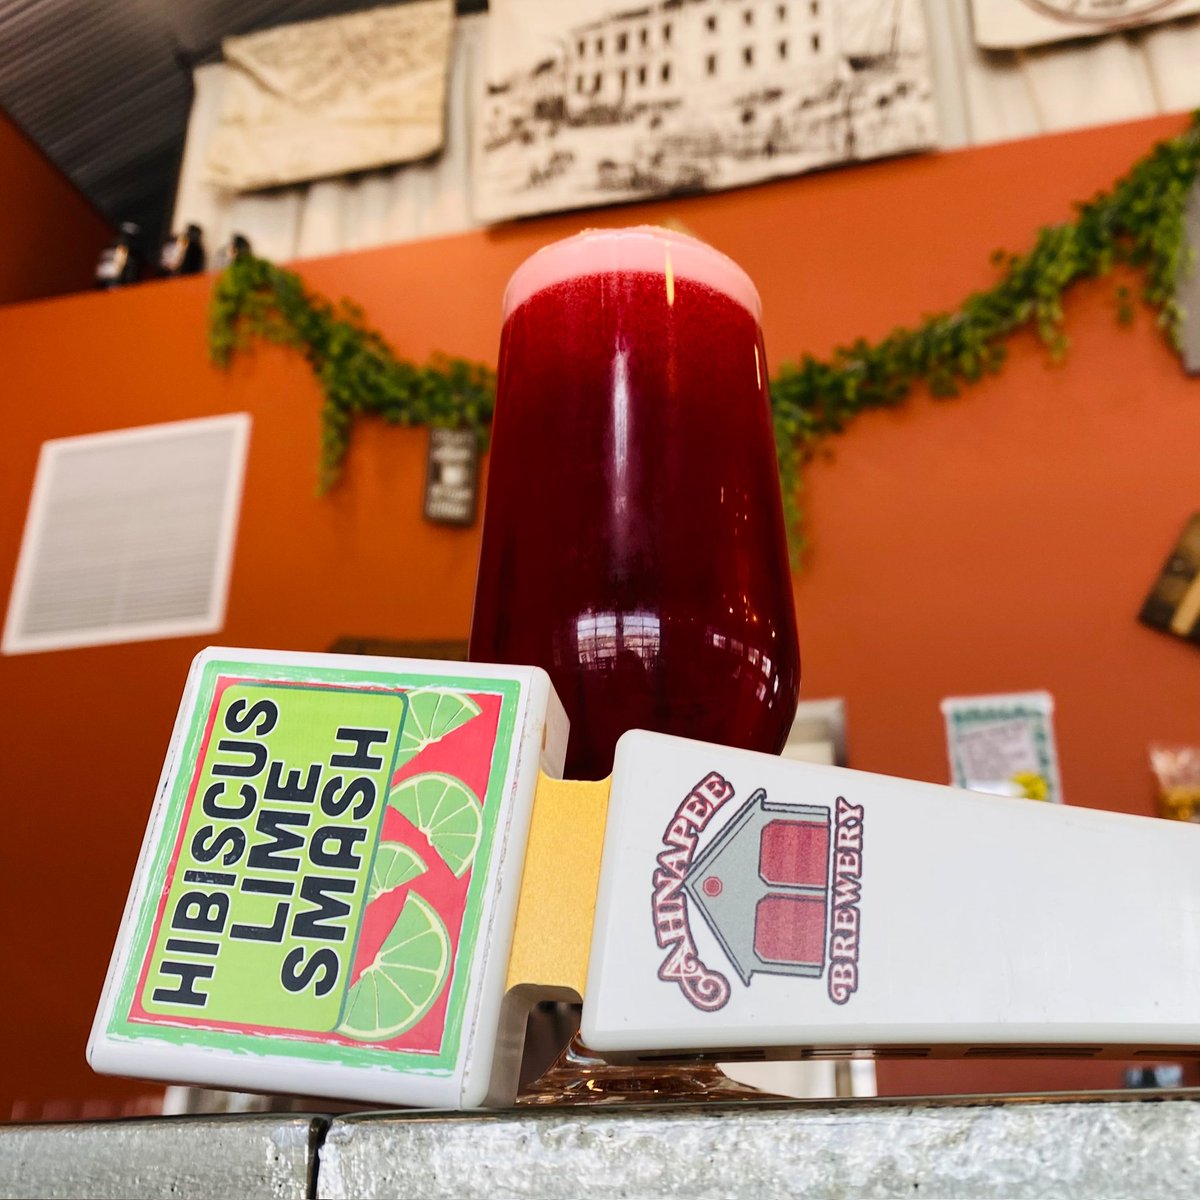 New Sour Ale!! Join us at either Taproom to enjoy our newest brew, Hibiscus Lime Smash! Brewed with lime & hibiscus flower, it gives you a deep red color, tea like aroma & flavor upfront & lime in the finish. Try a pint today! #wibeer #sourbeer